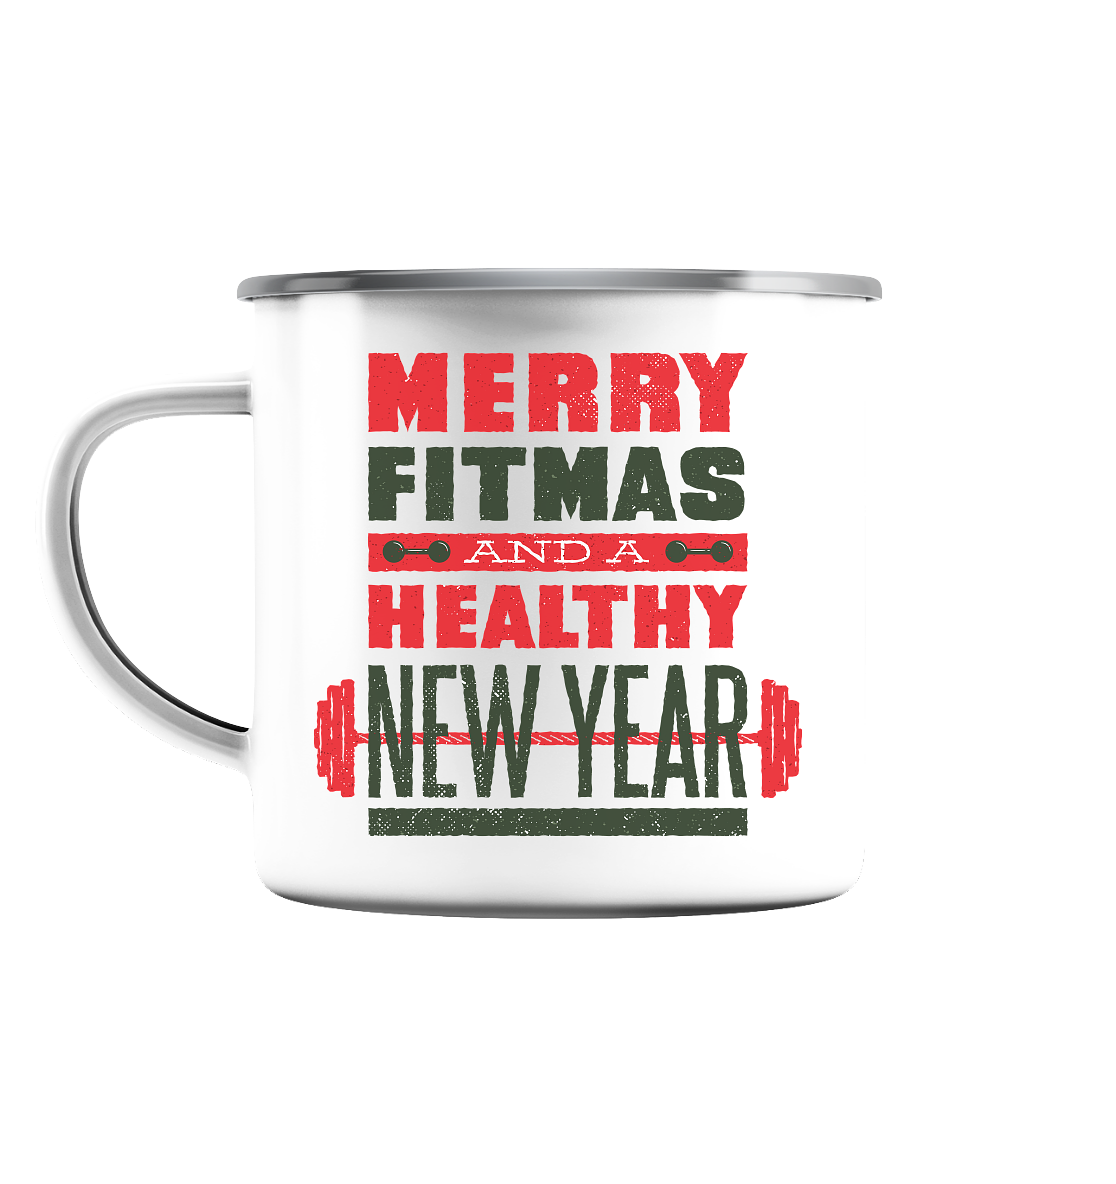 Weihnachtliches Design, Gym, Merry Fitmas and a Healthy New Year - Emaille Tasse (Silber)